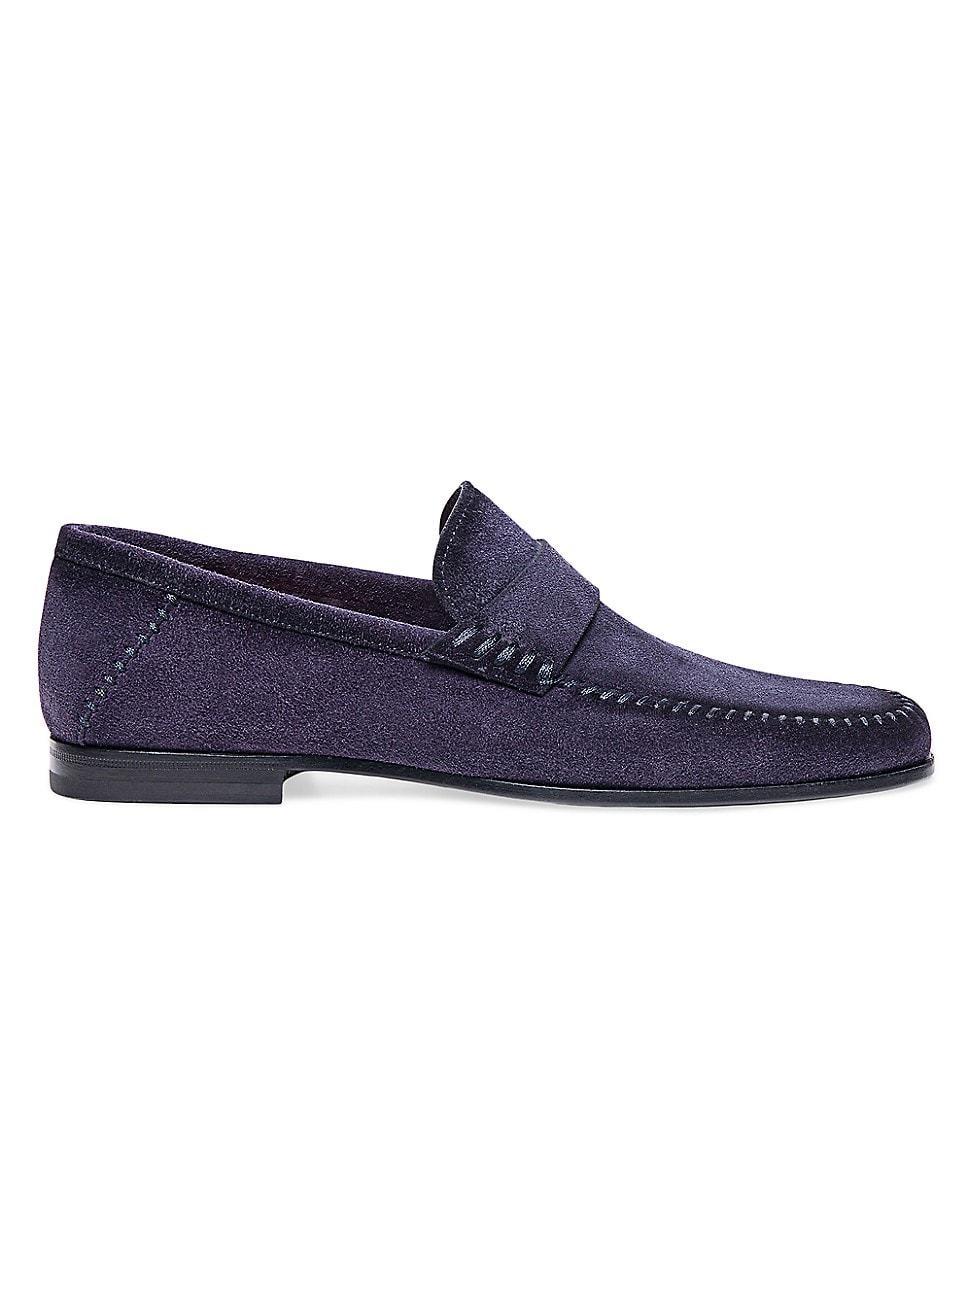 Mens Burnished Suede Loafers Product Image